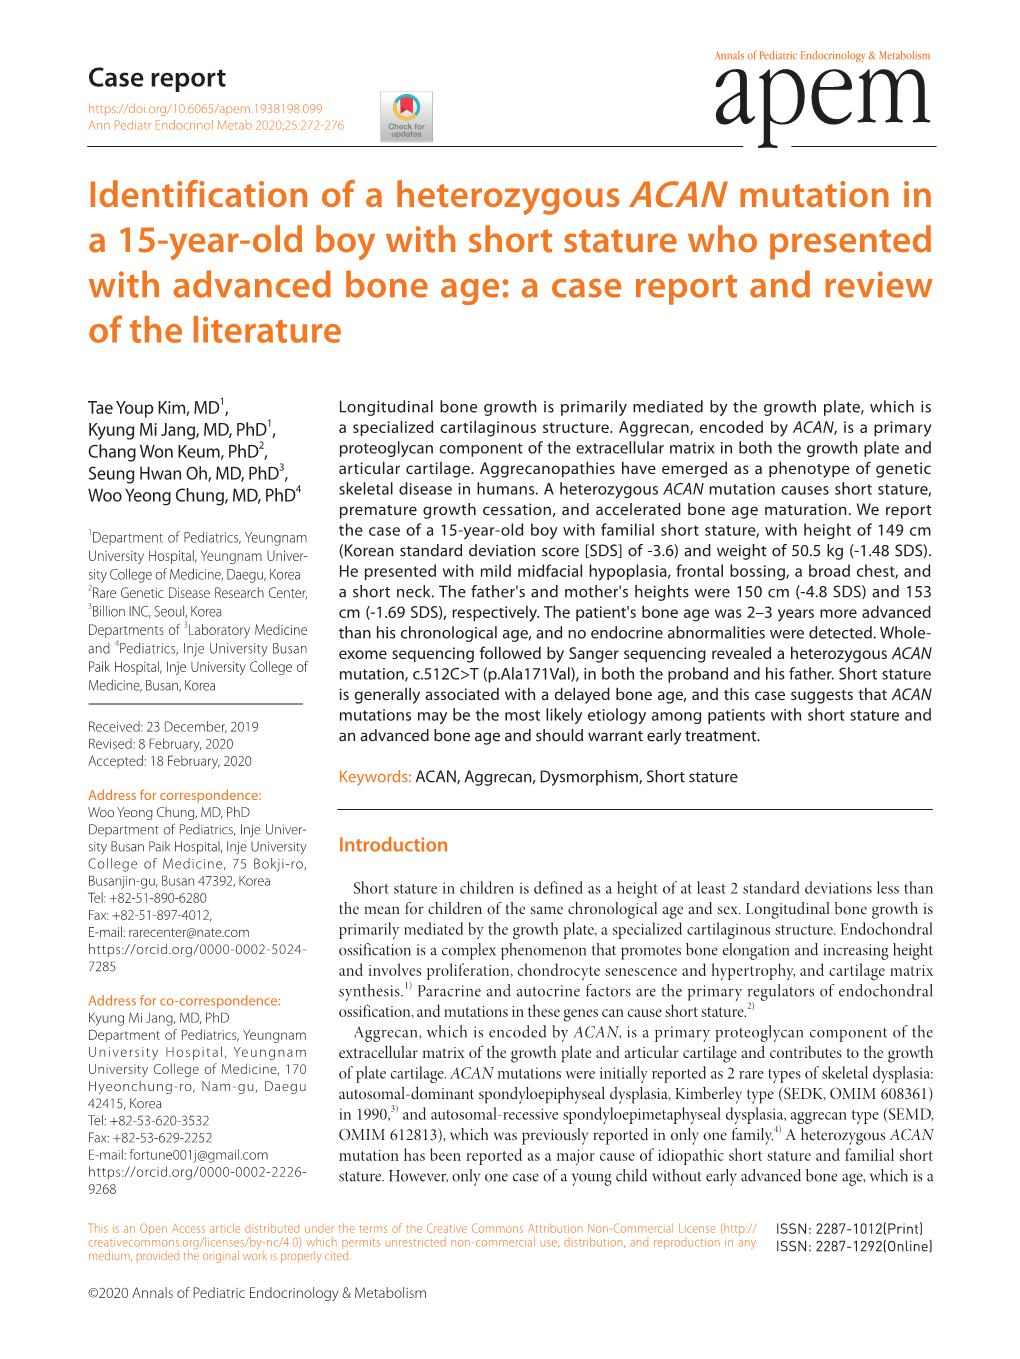 Identification of a Heterozygous ACAN Mutation in a 15-Year-Old Boy With